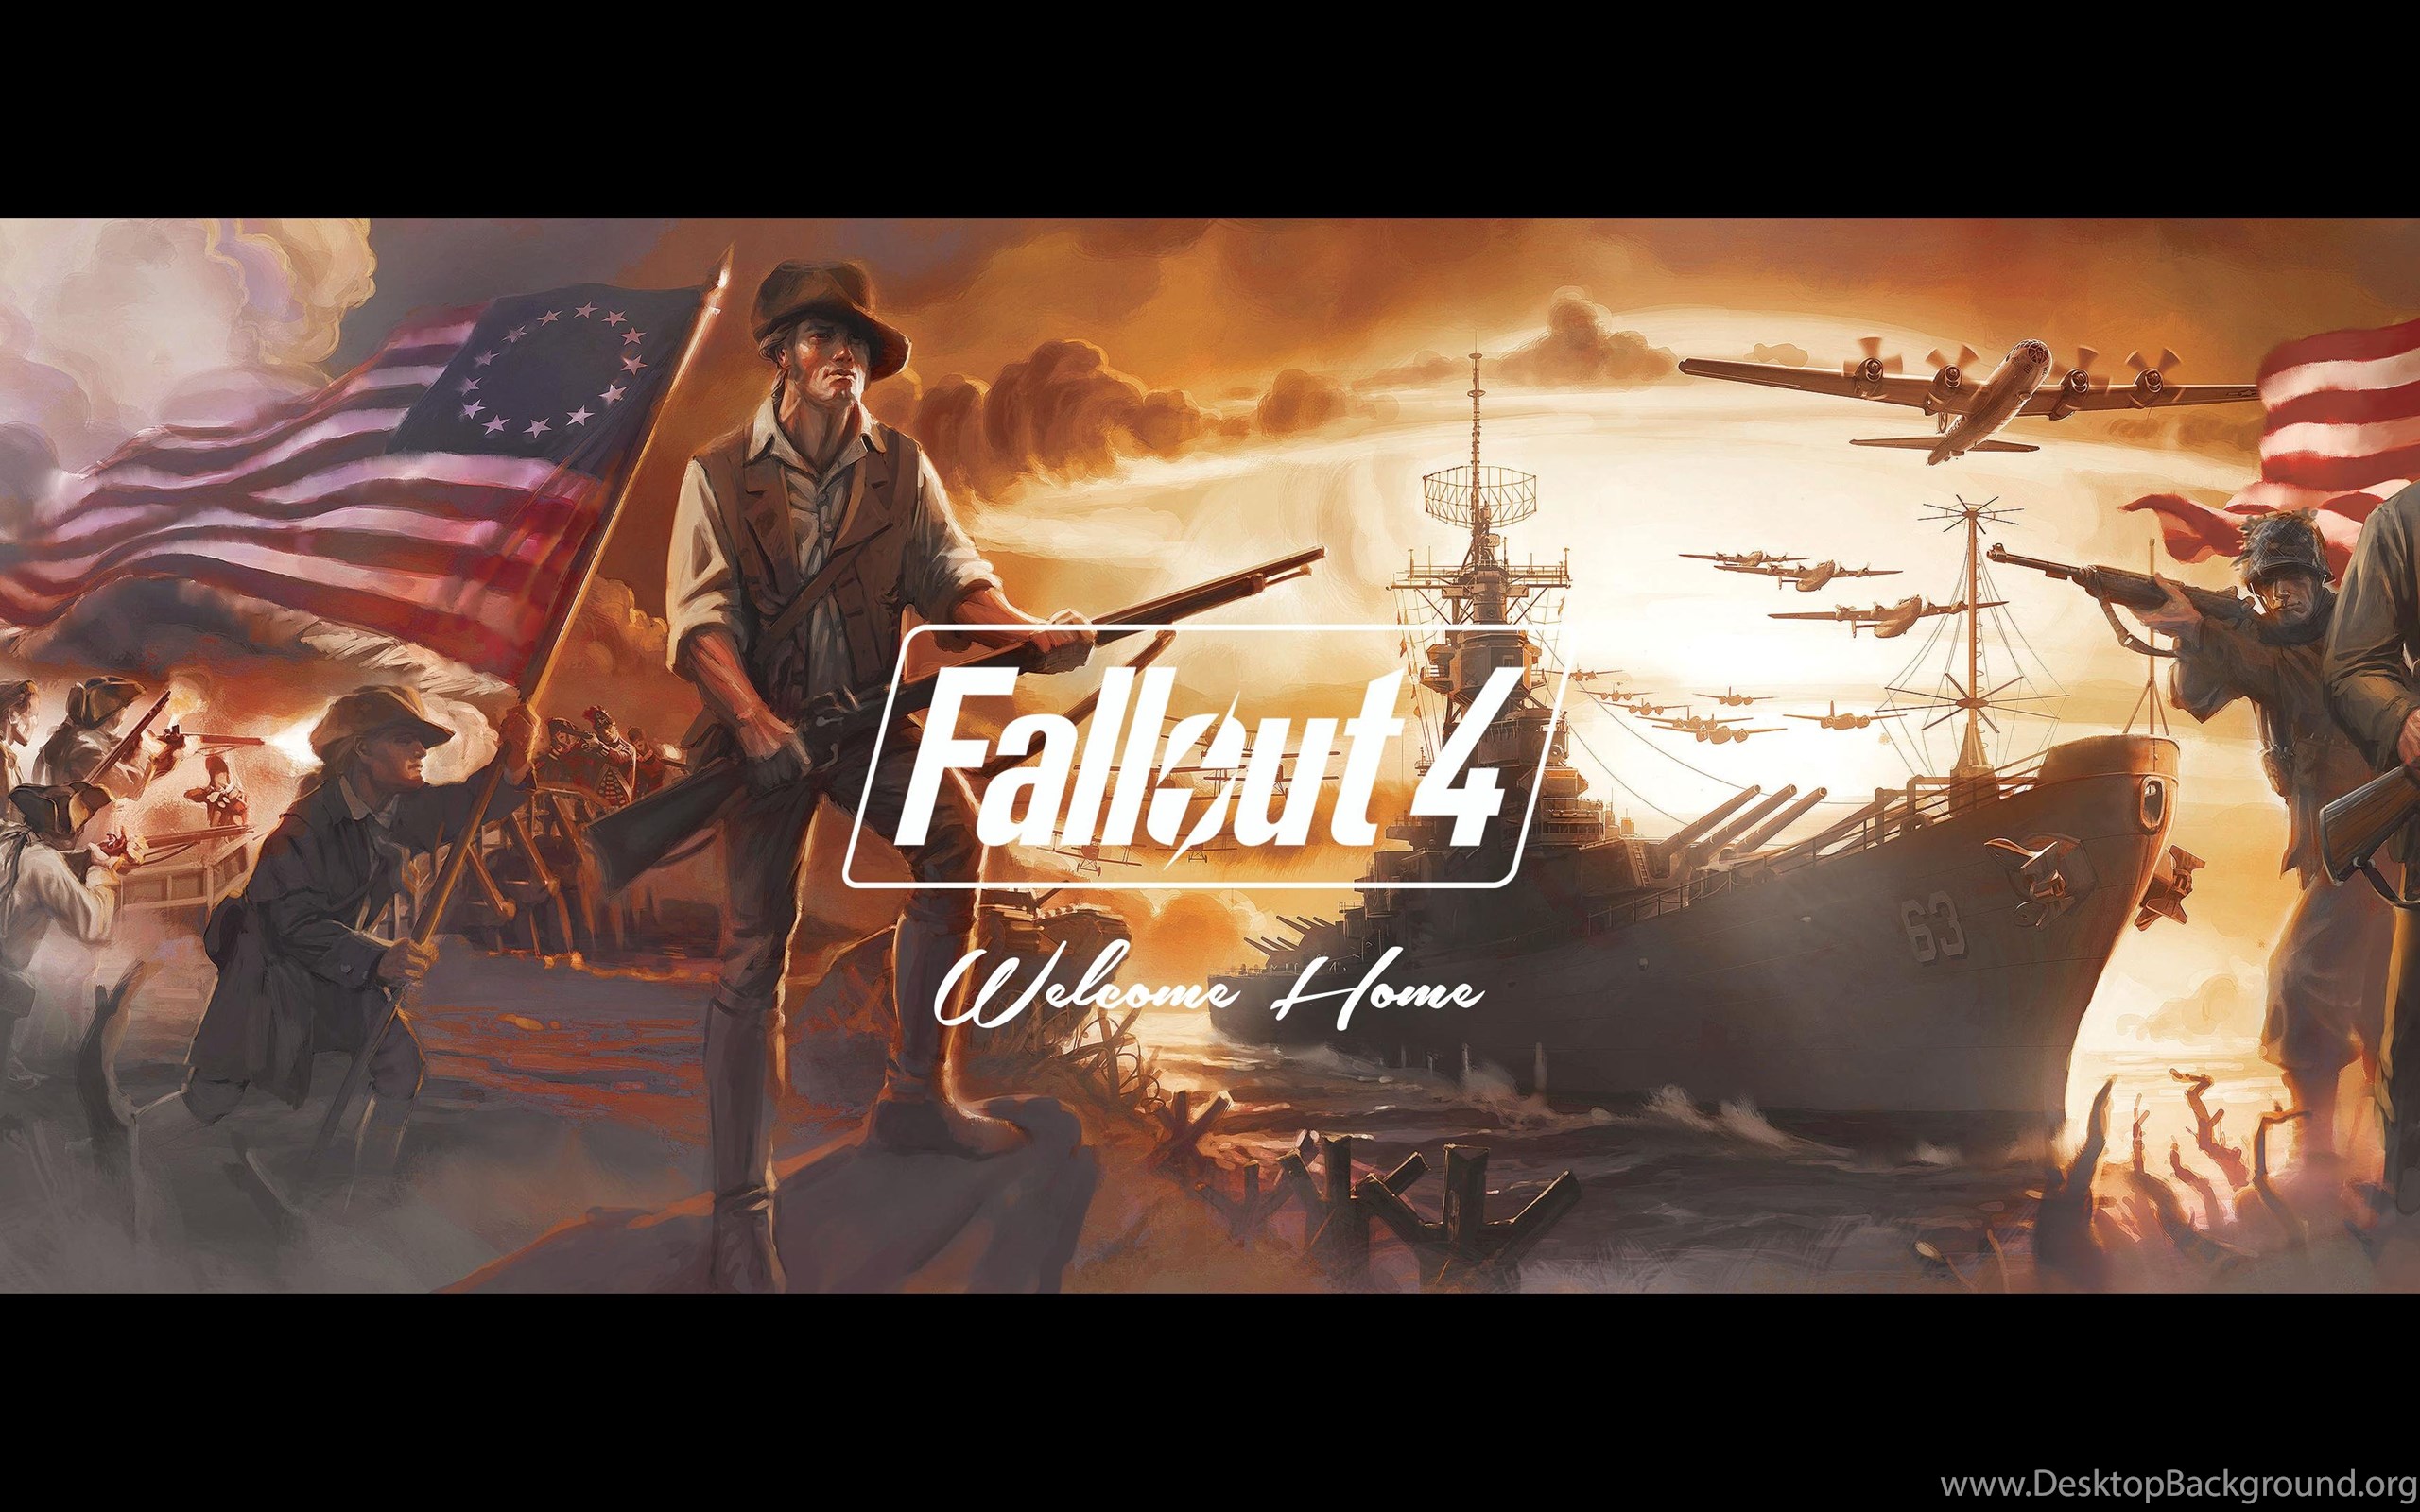 Fallout 4 wallpapers 4k фото 50